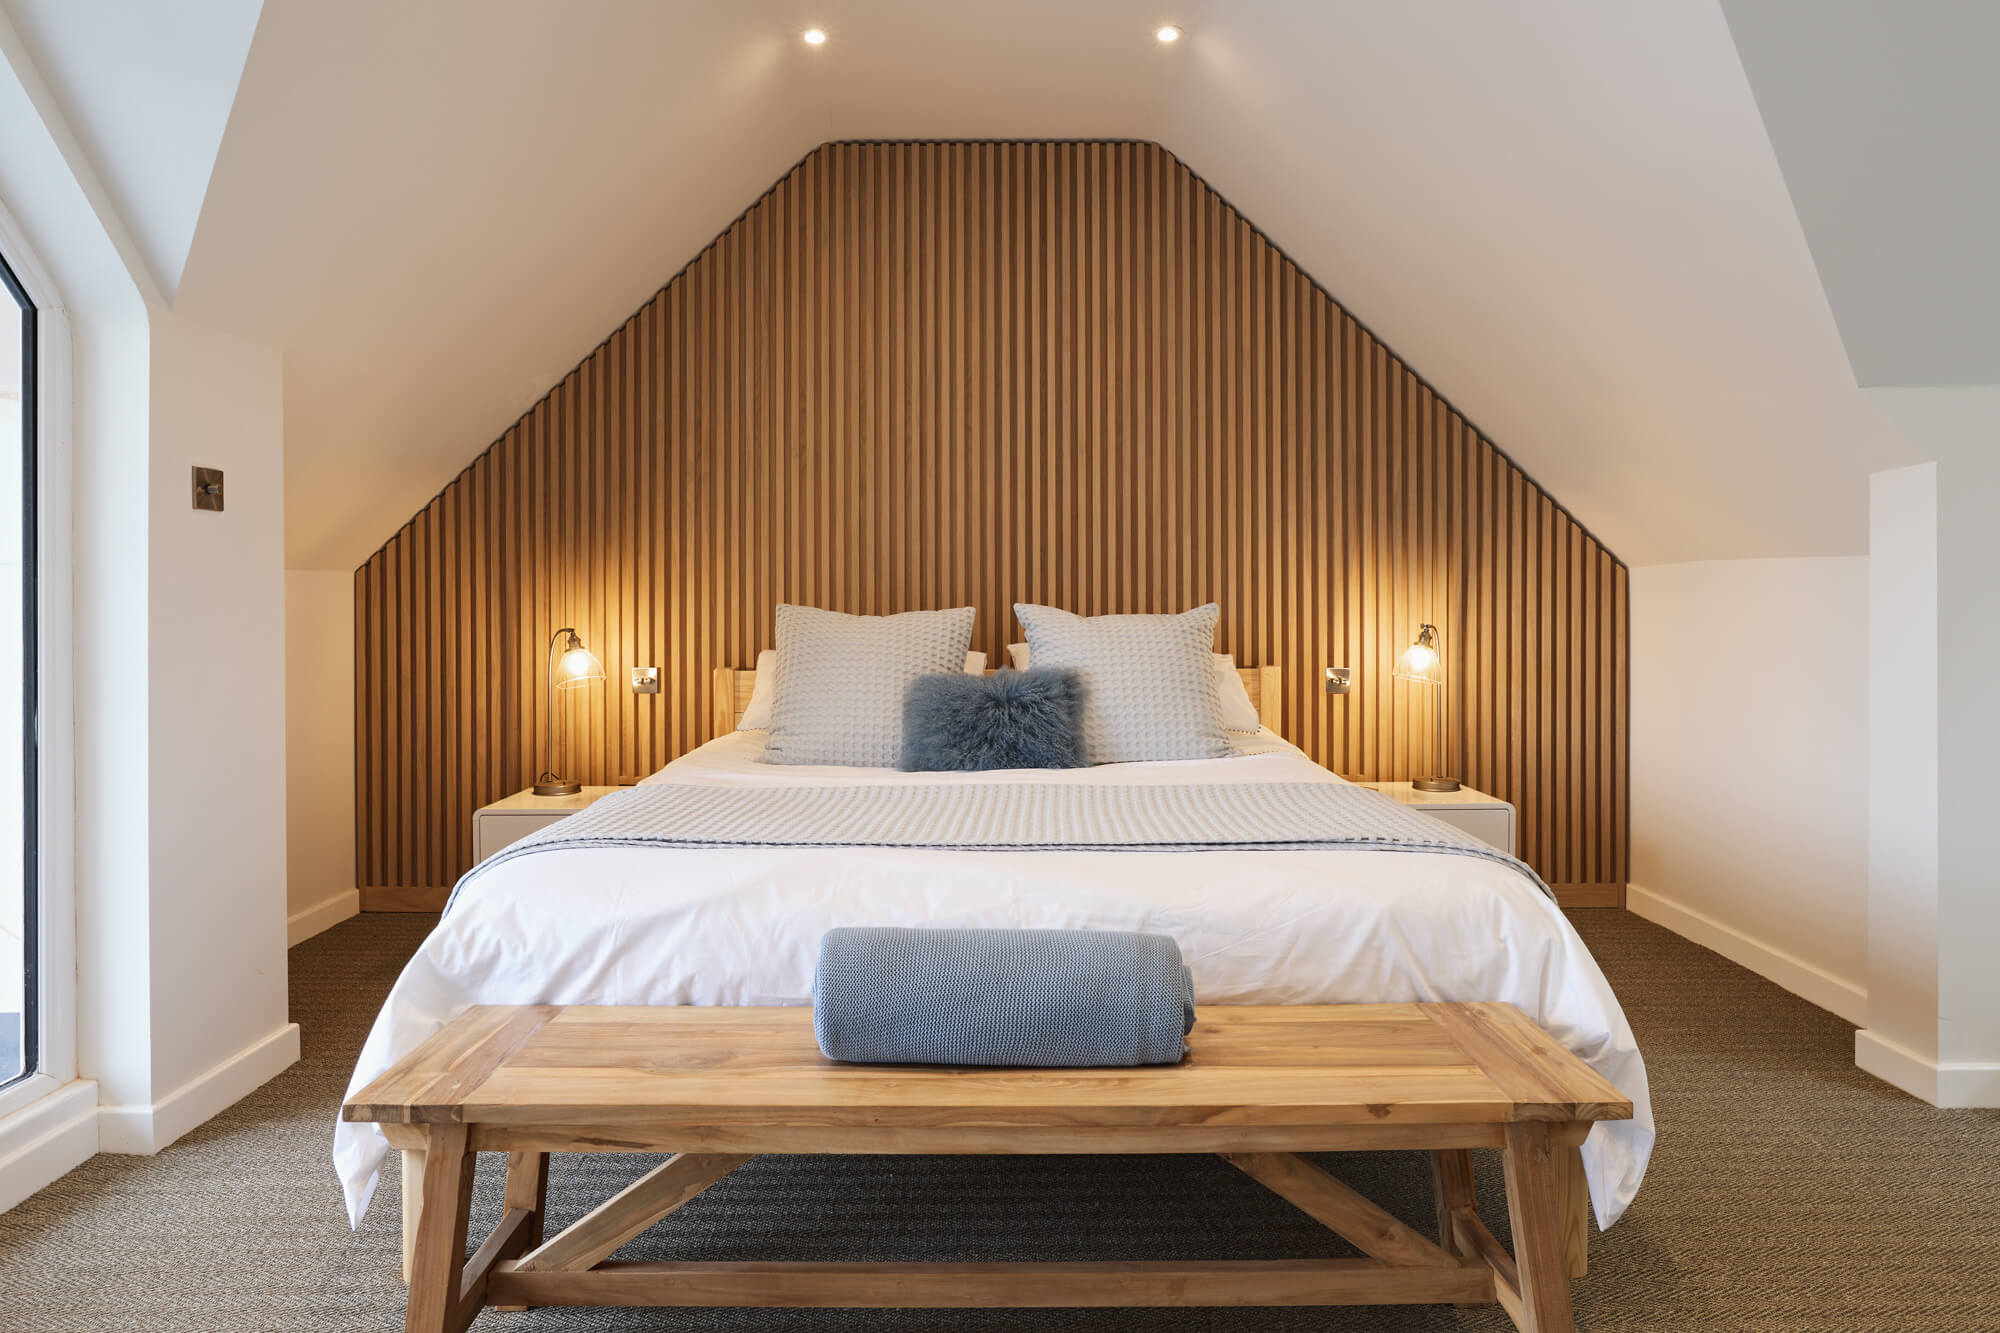 A master bedroom with a white oak slatted millwork accent wall finished with an interior wood finish, Rubio Monocoat Oil Plus 2C. This is amazing modern bedroom design inspiration!